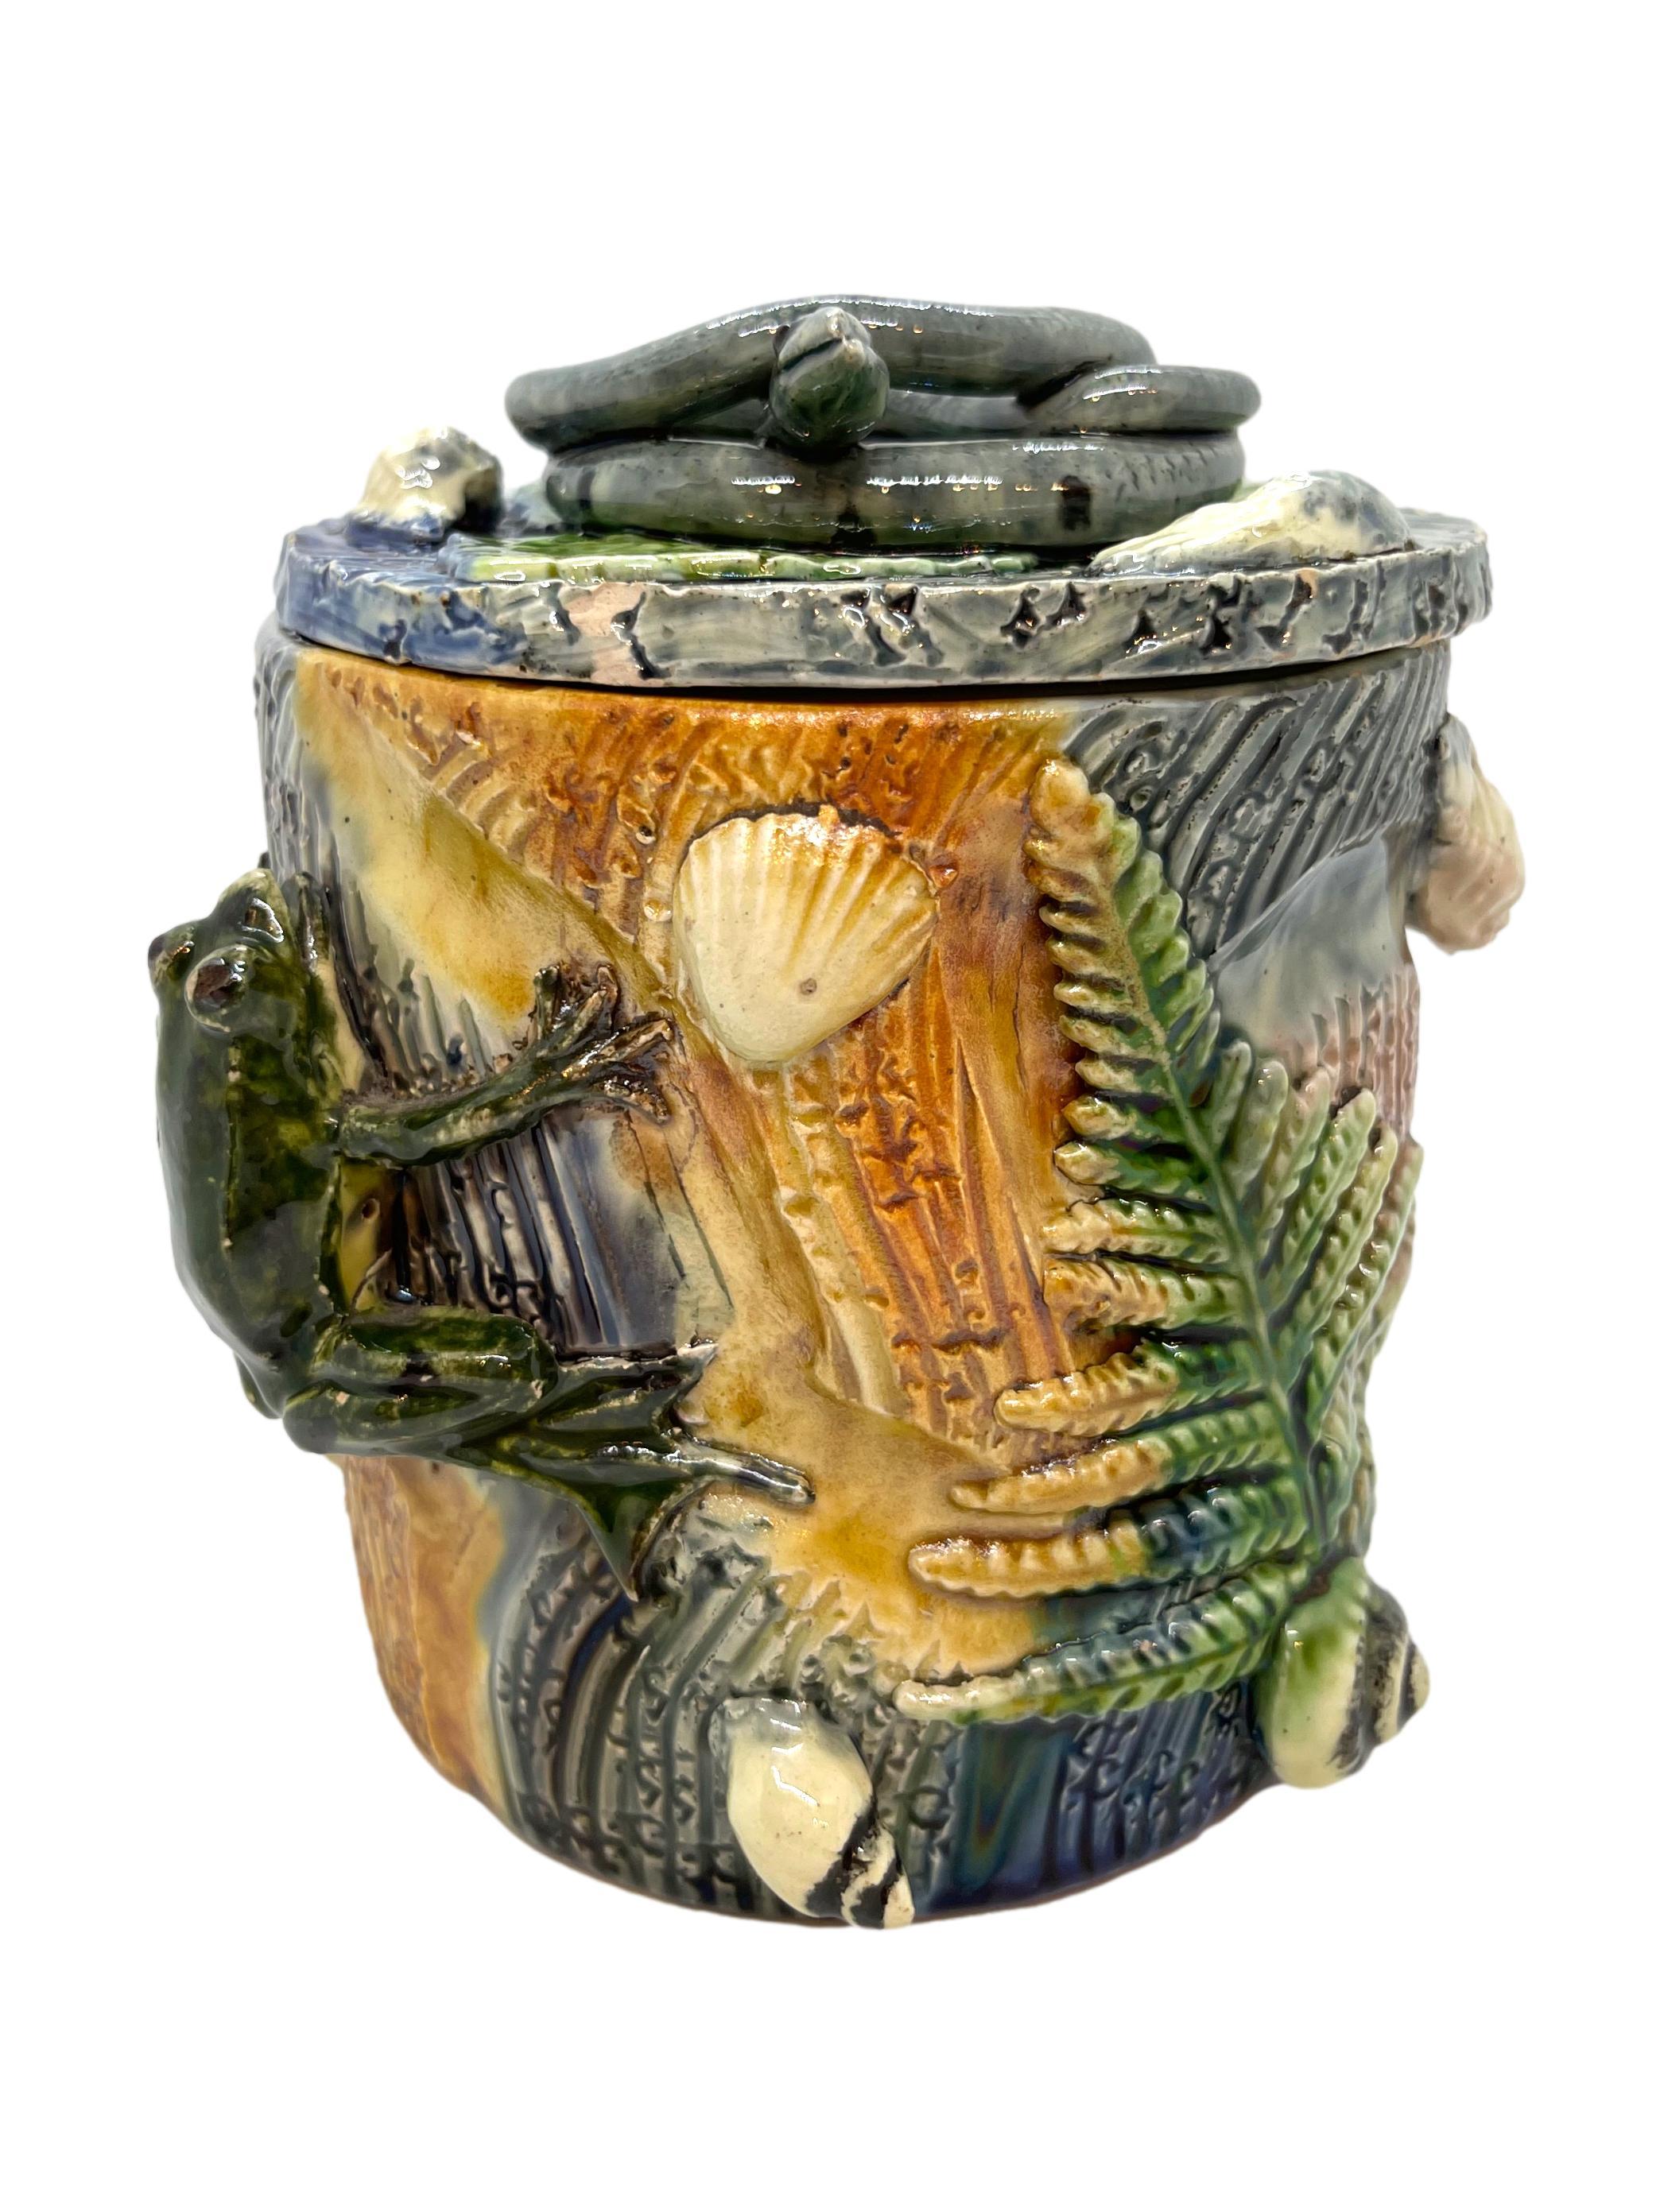 French Palissy Ware Majolica Trompe l'oeil humidor/tobacco jar by Thomas-Victor Sergent, (French, 1830-1890). The reverse signed with the impressed initials 'T.S.' for Thomas Sergent. 
Sergent was an important member of the School of Paris; he